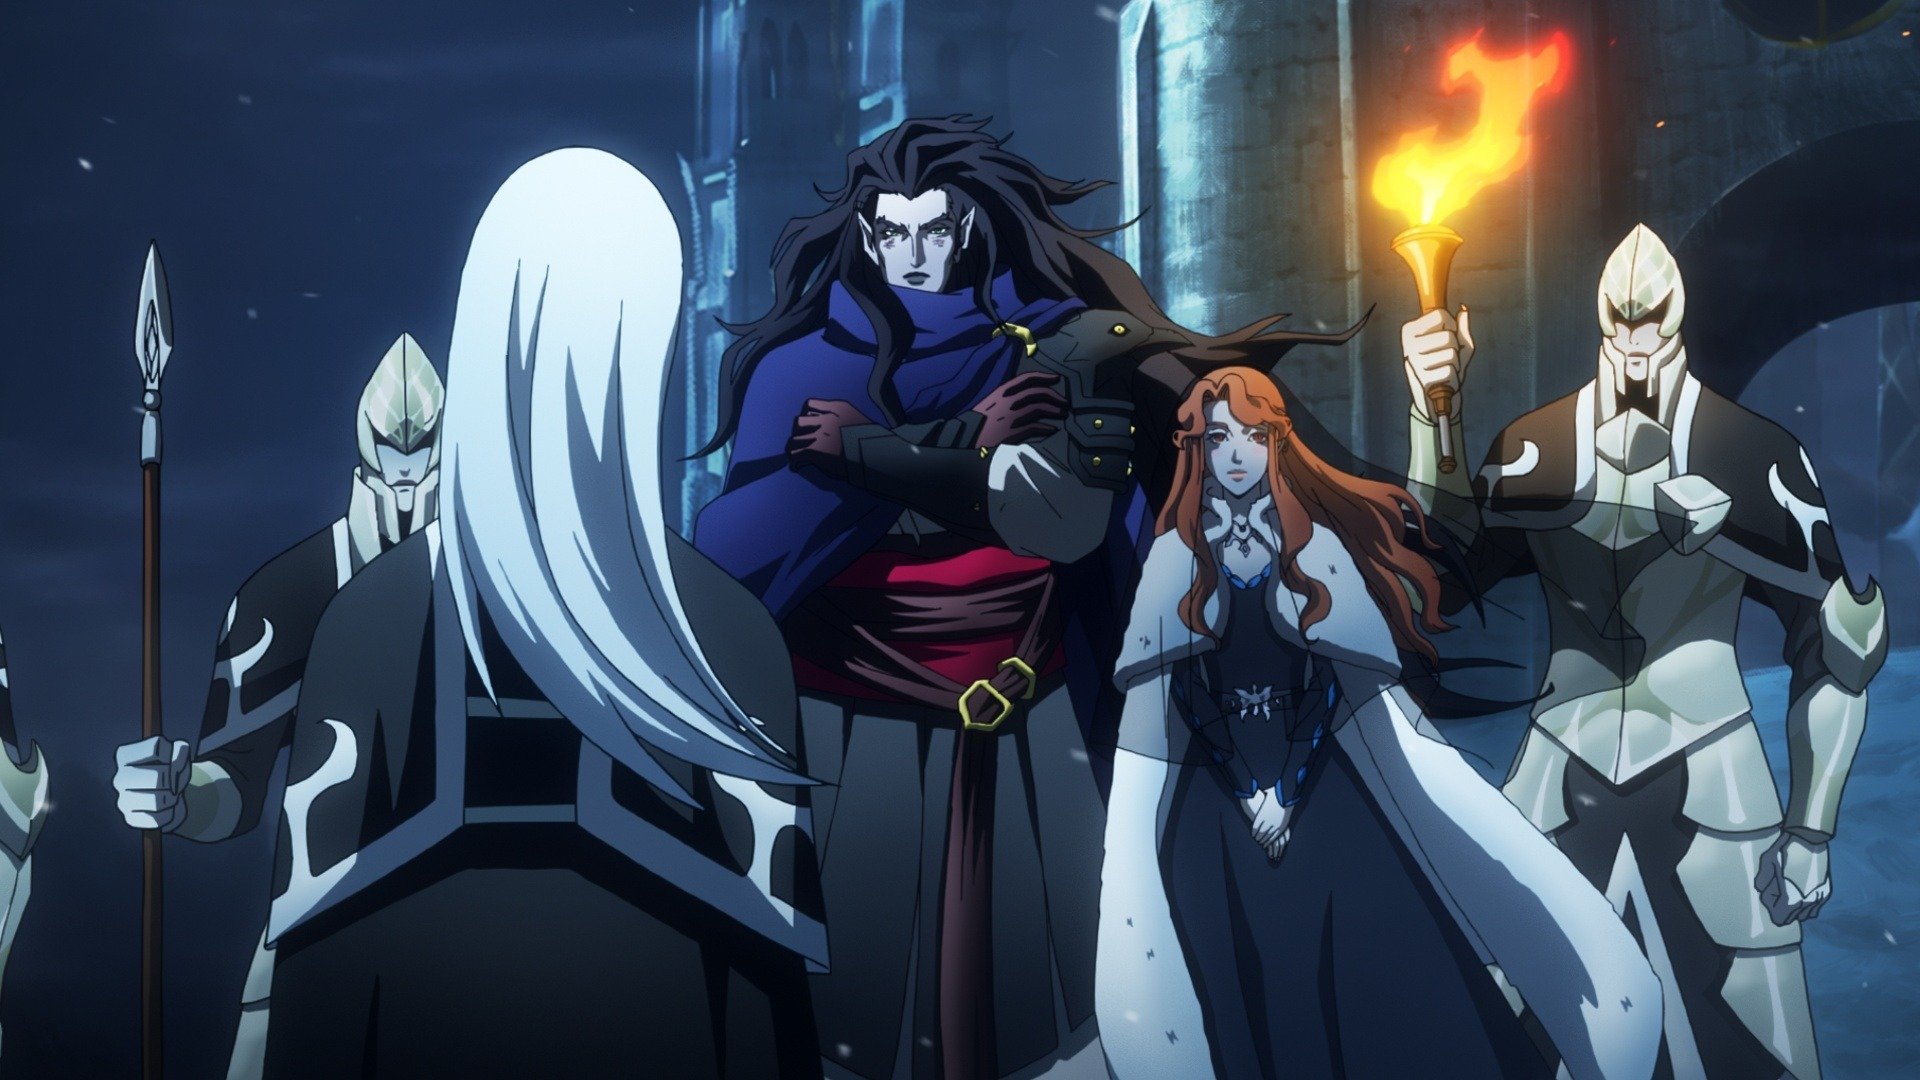 Castlevania Universe Expands With New Series Set During French Revolution   Deadline